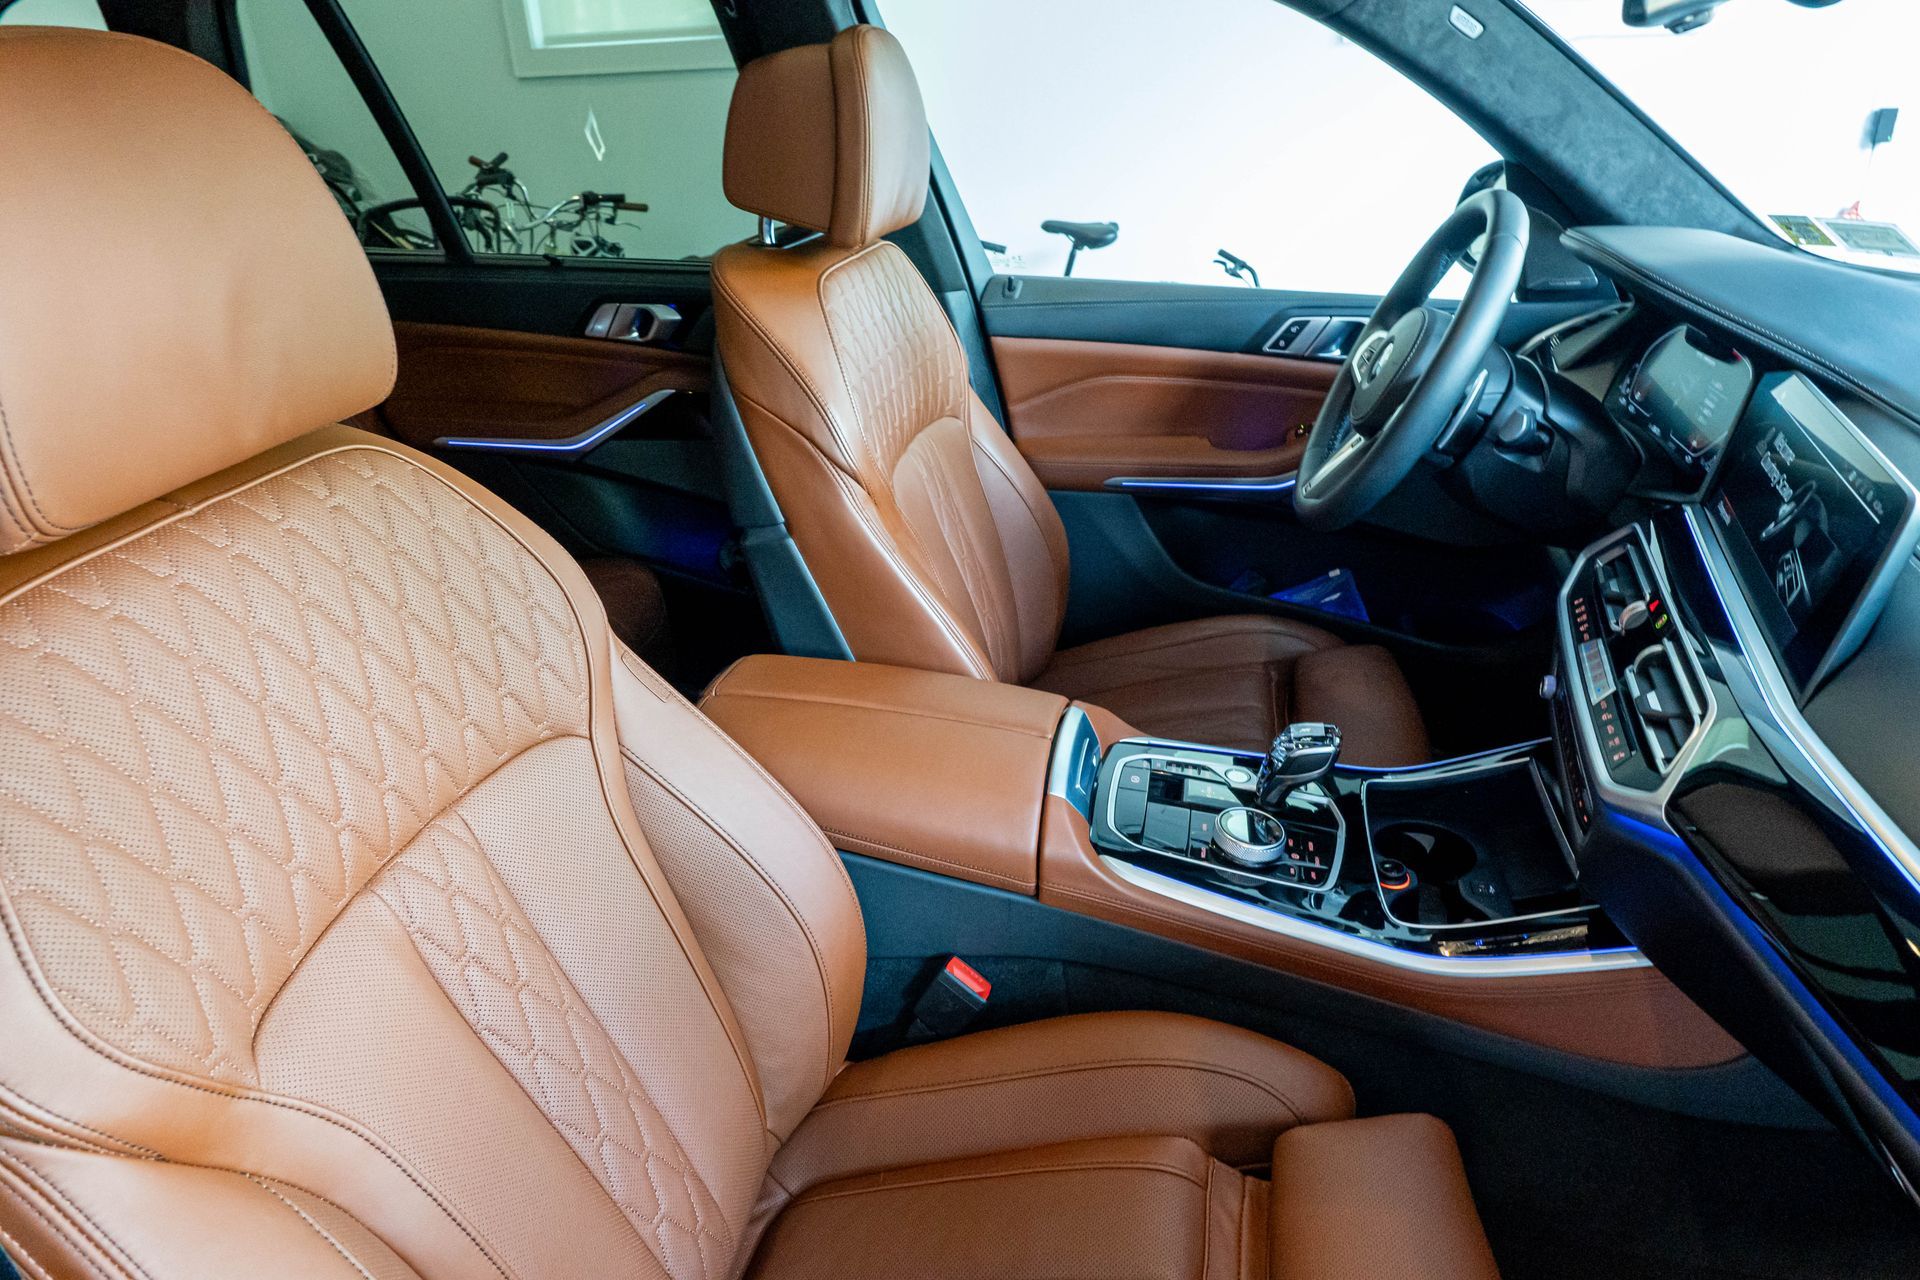 The interior of a car with brown leather seats and a steering wheel.